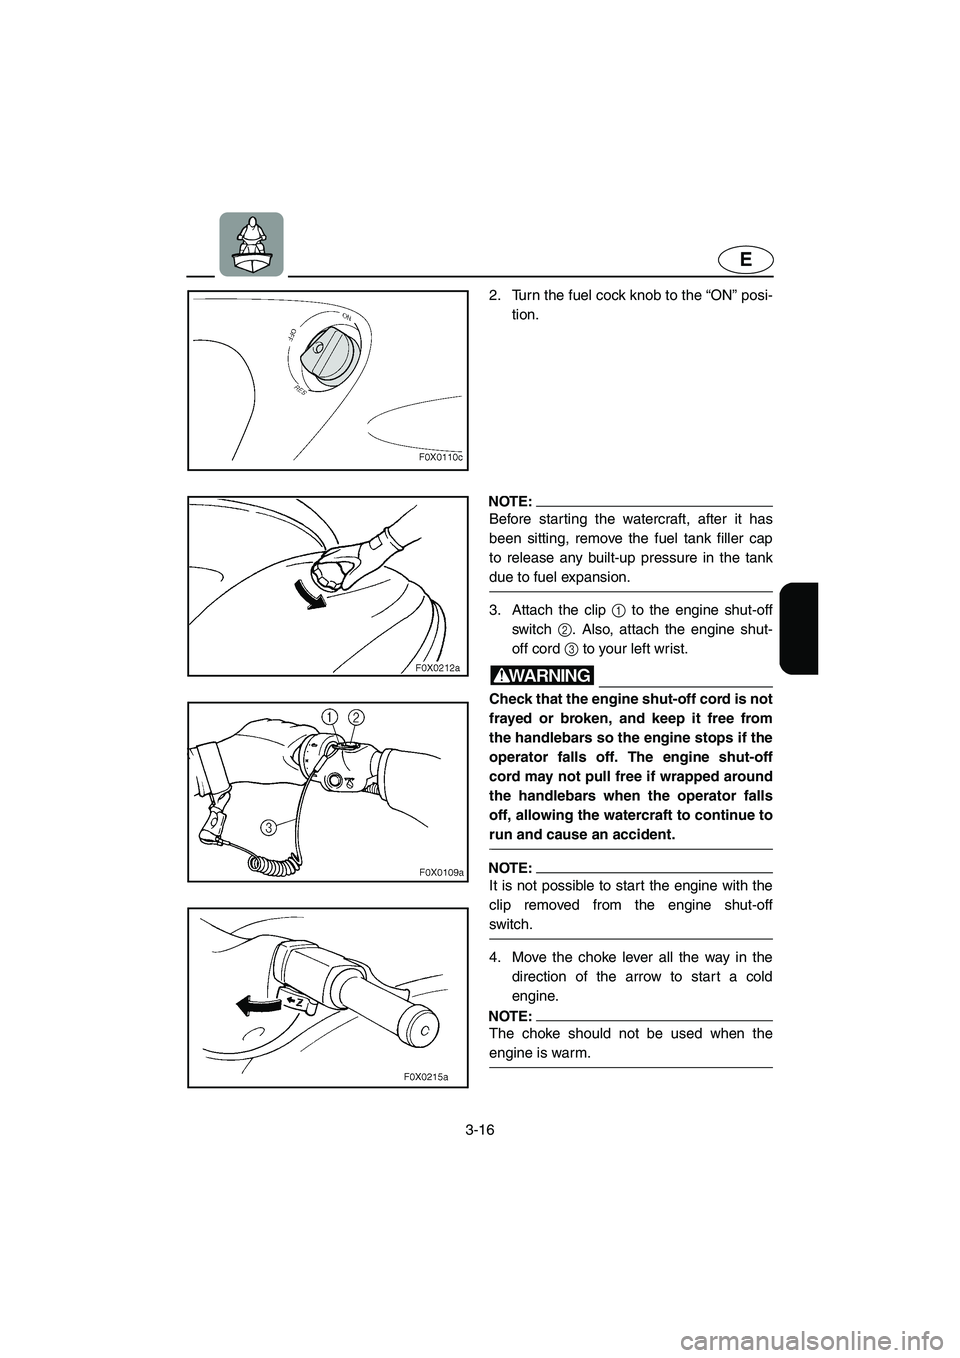 YAMAHA GP800R 2002 User Guide 3-16
E
2. Turn the fuel cock knob to the “ON” posi-
tion. 
NOTE:@ Before starting the watercraft, after it has
been sitting, remove the fuel tank filler cap
to release any built-up pressure in the